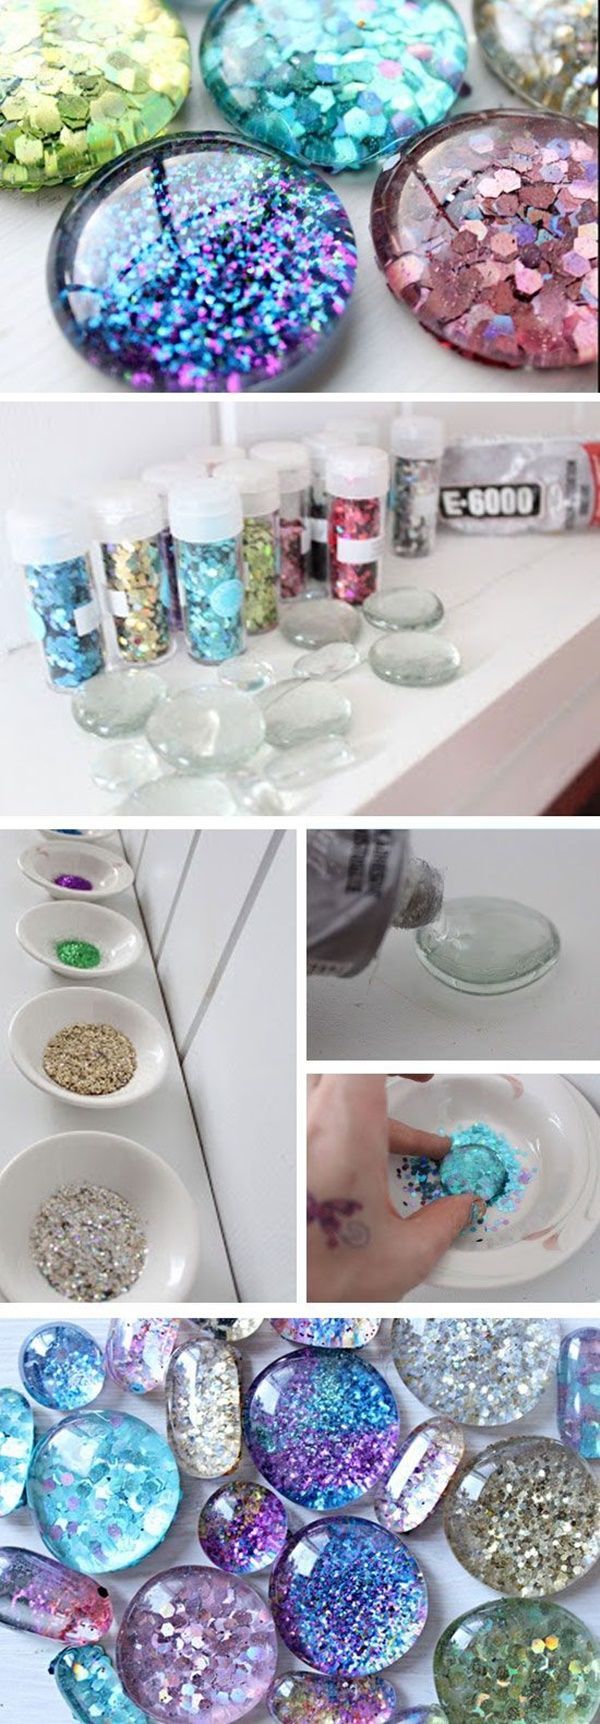 16 diy Crafts for teenagers ideas